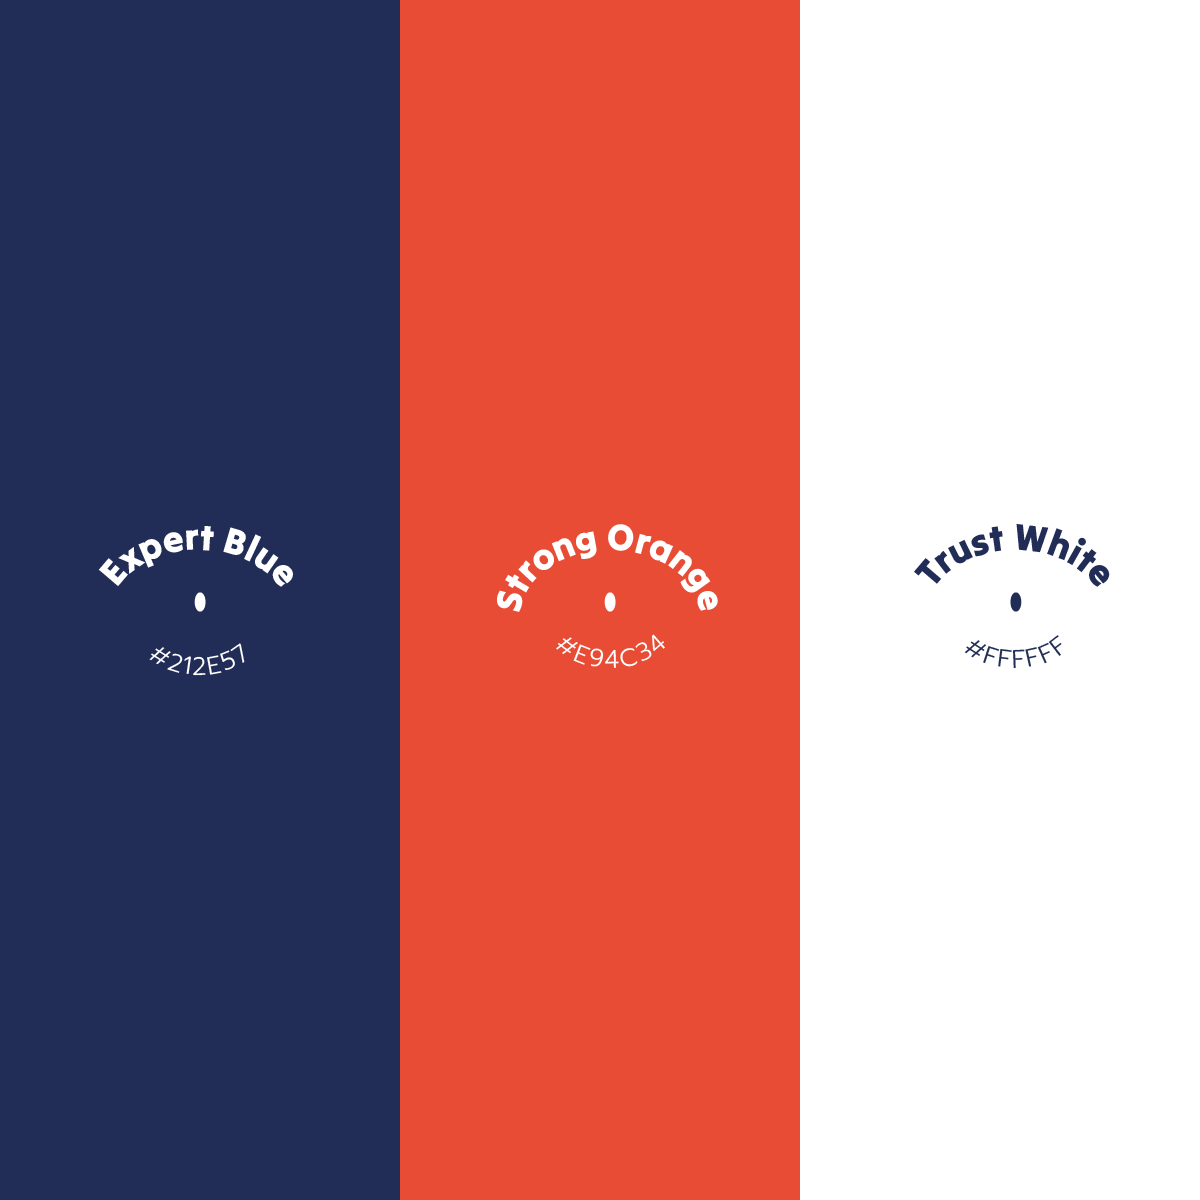 The three colors used on the SPM logo design: are Expert Blue, Strong Orange, and trust white.